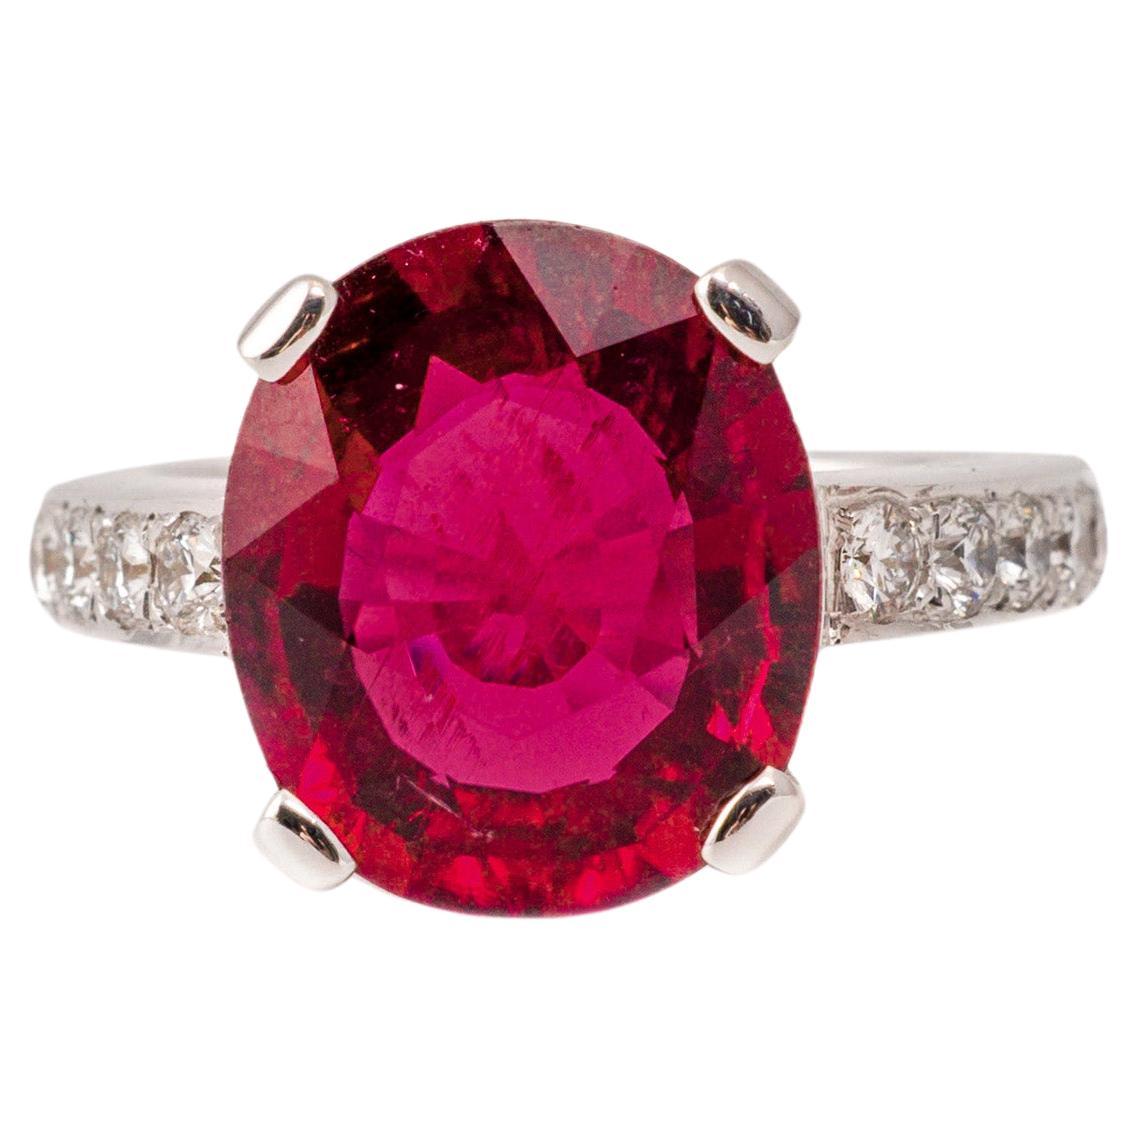 "Costis" Eagle Claw Ring with 7.46 Carats Rubellite and Diamonds